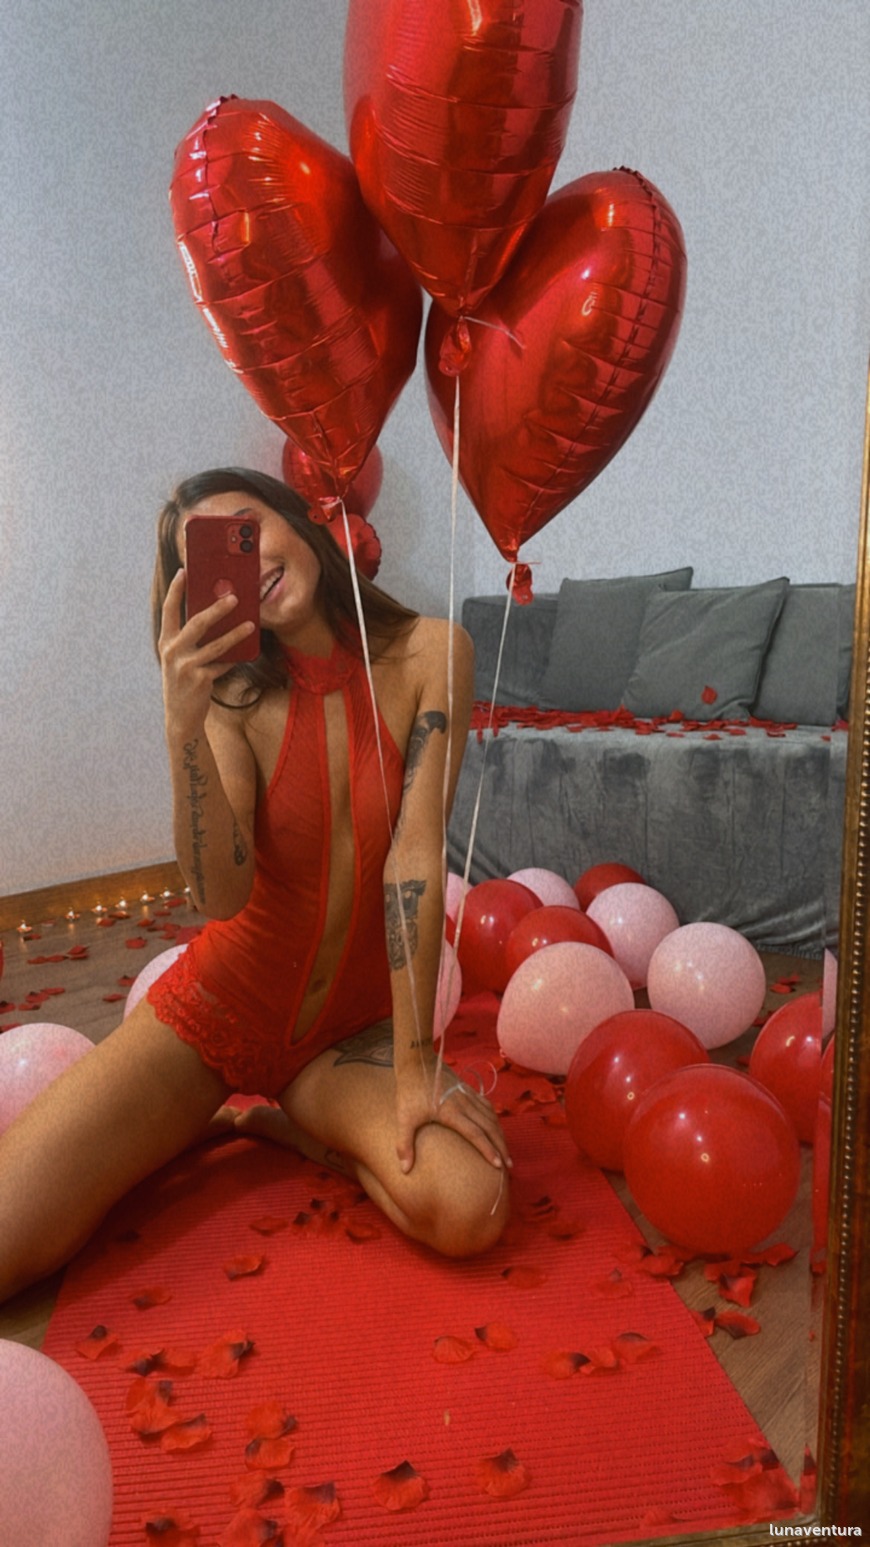 Roses are red, the sky is blue, and my Valentine content is waiting for you 💖 Happy Valentine's Day to all my lovely fans! Come and spend this special day with me on my DMs 🔥